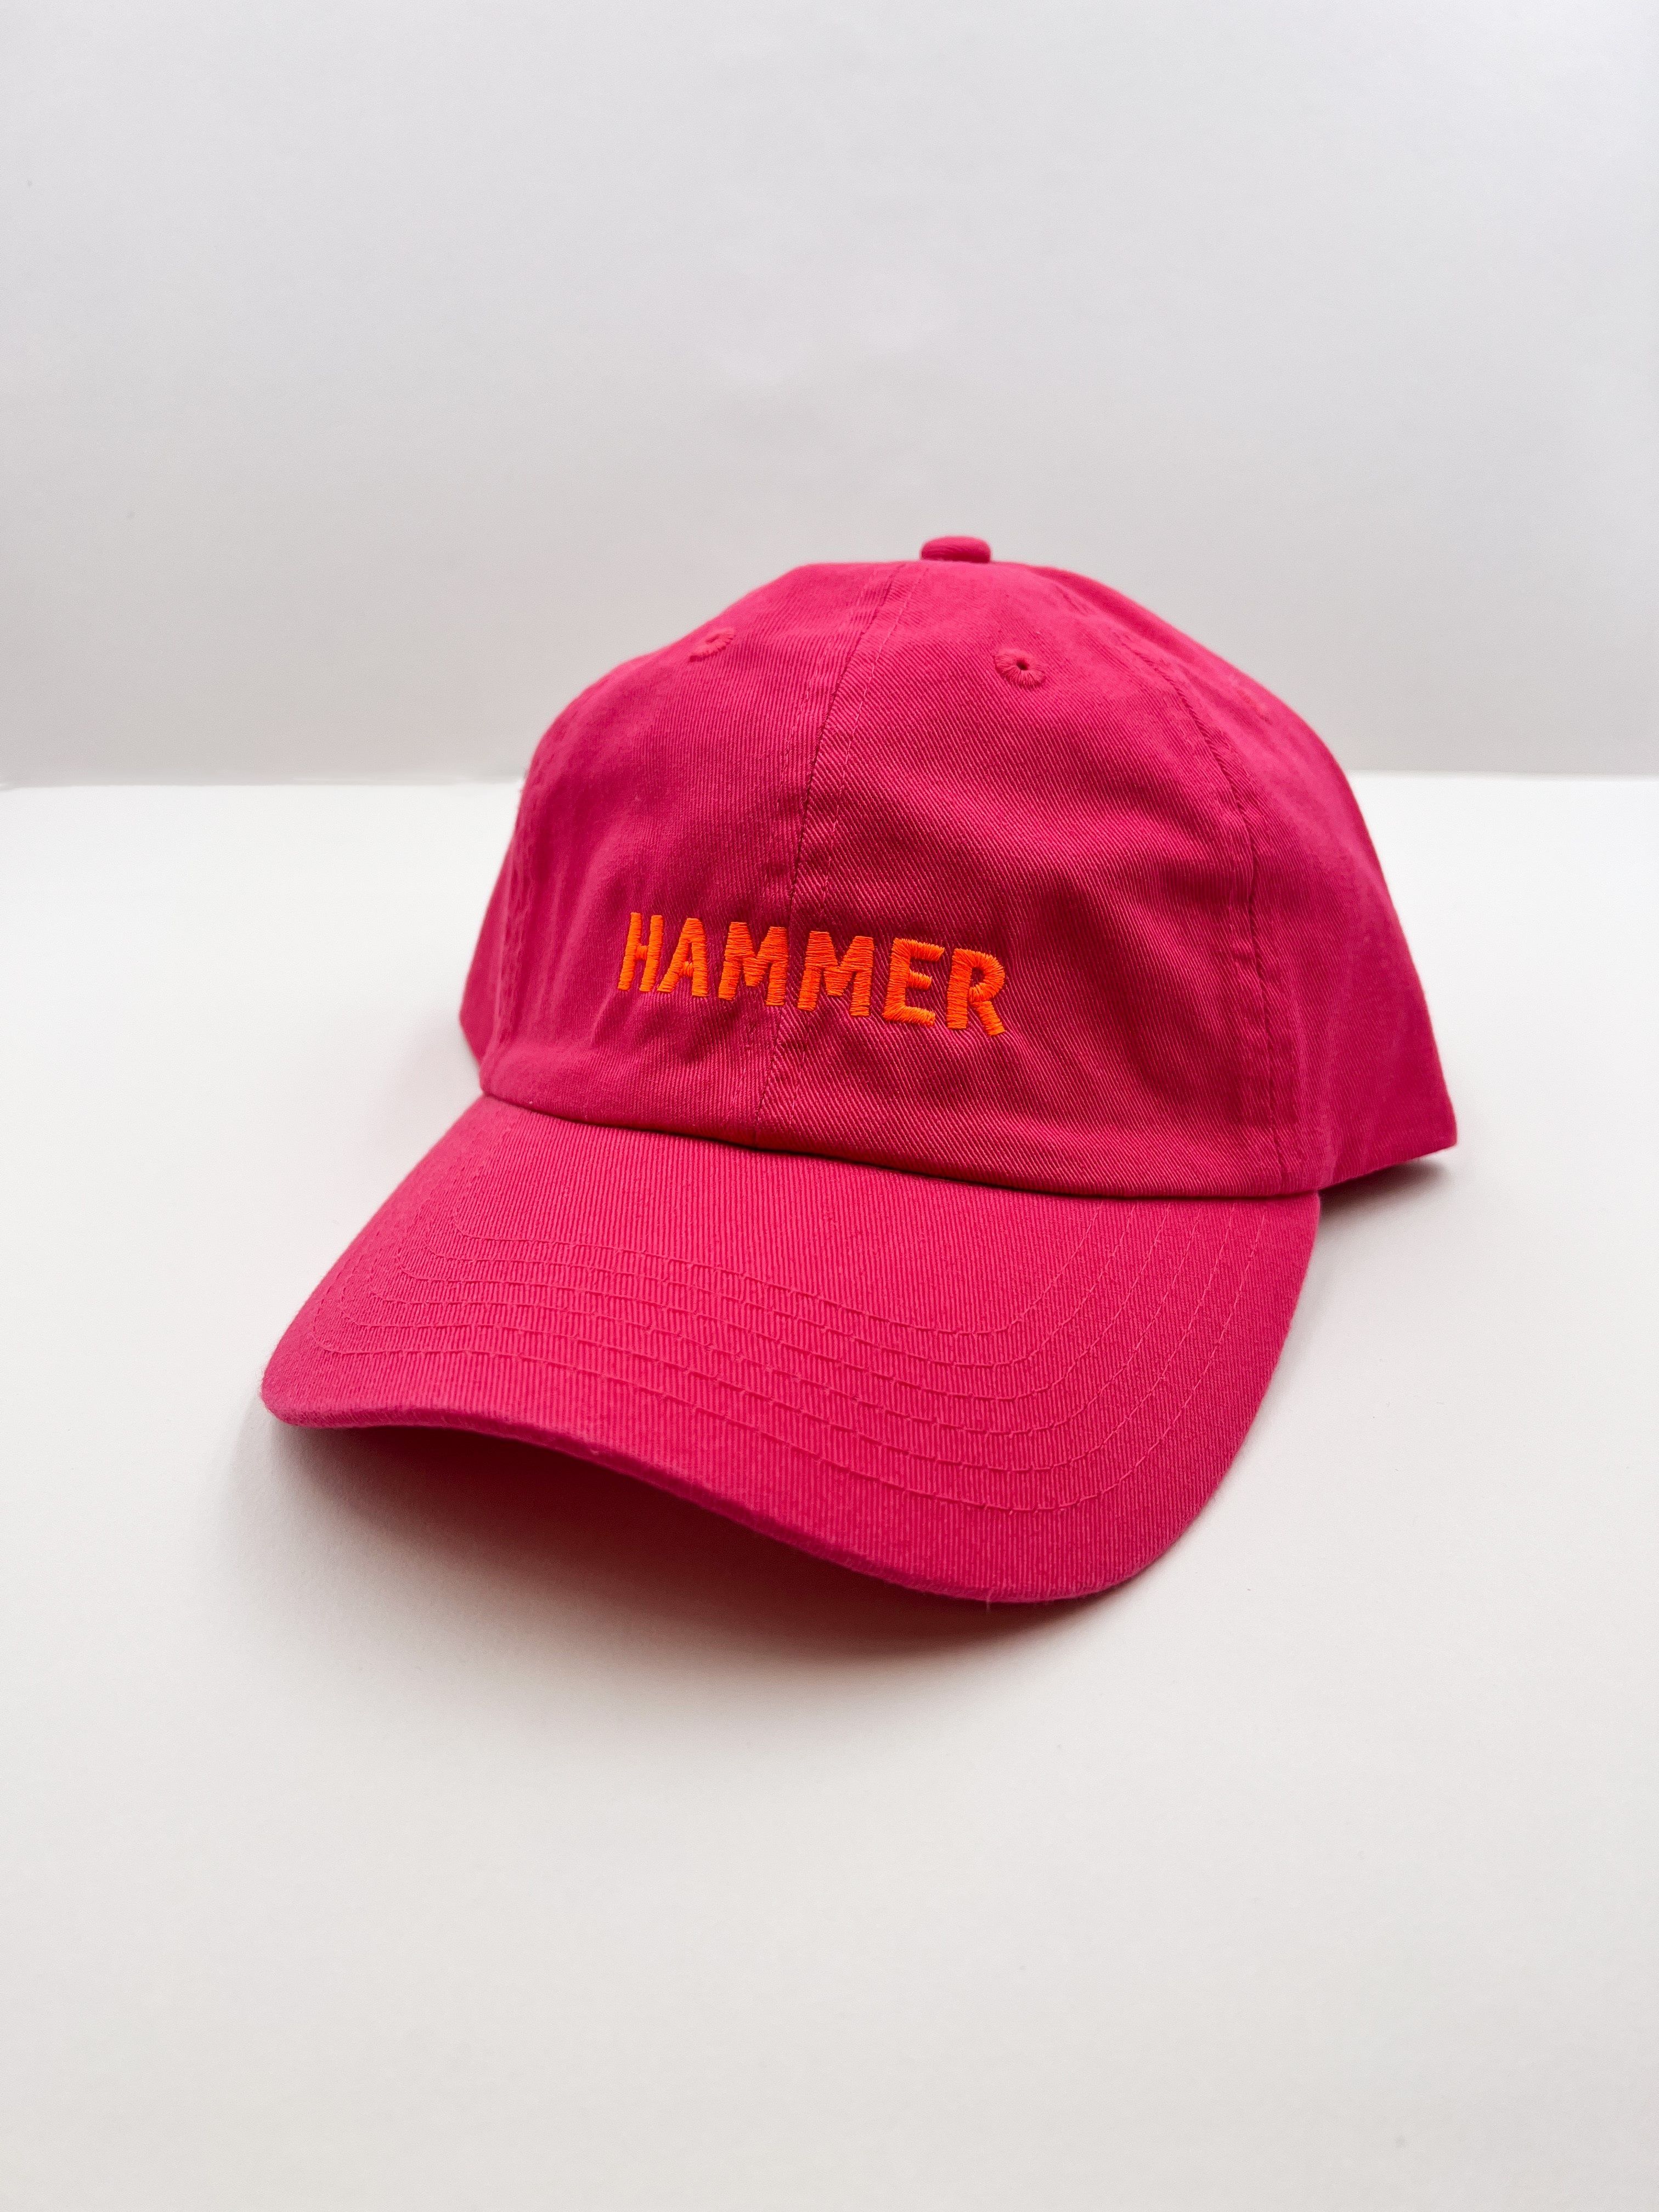 A hot pink hat with the word HAMMER